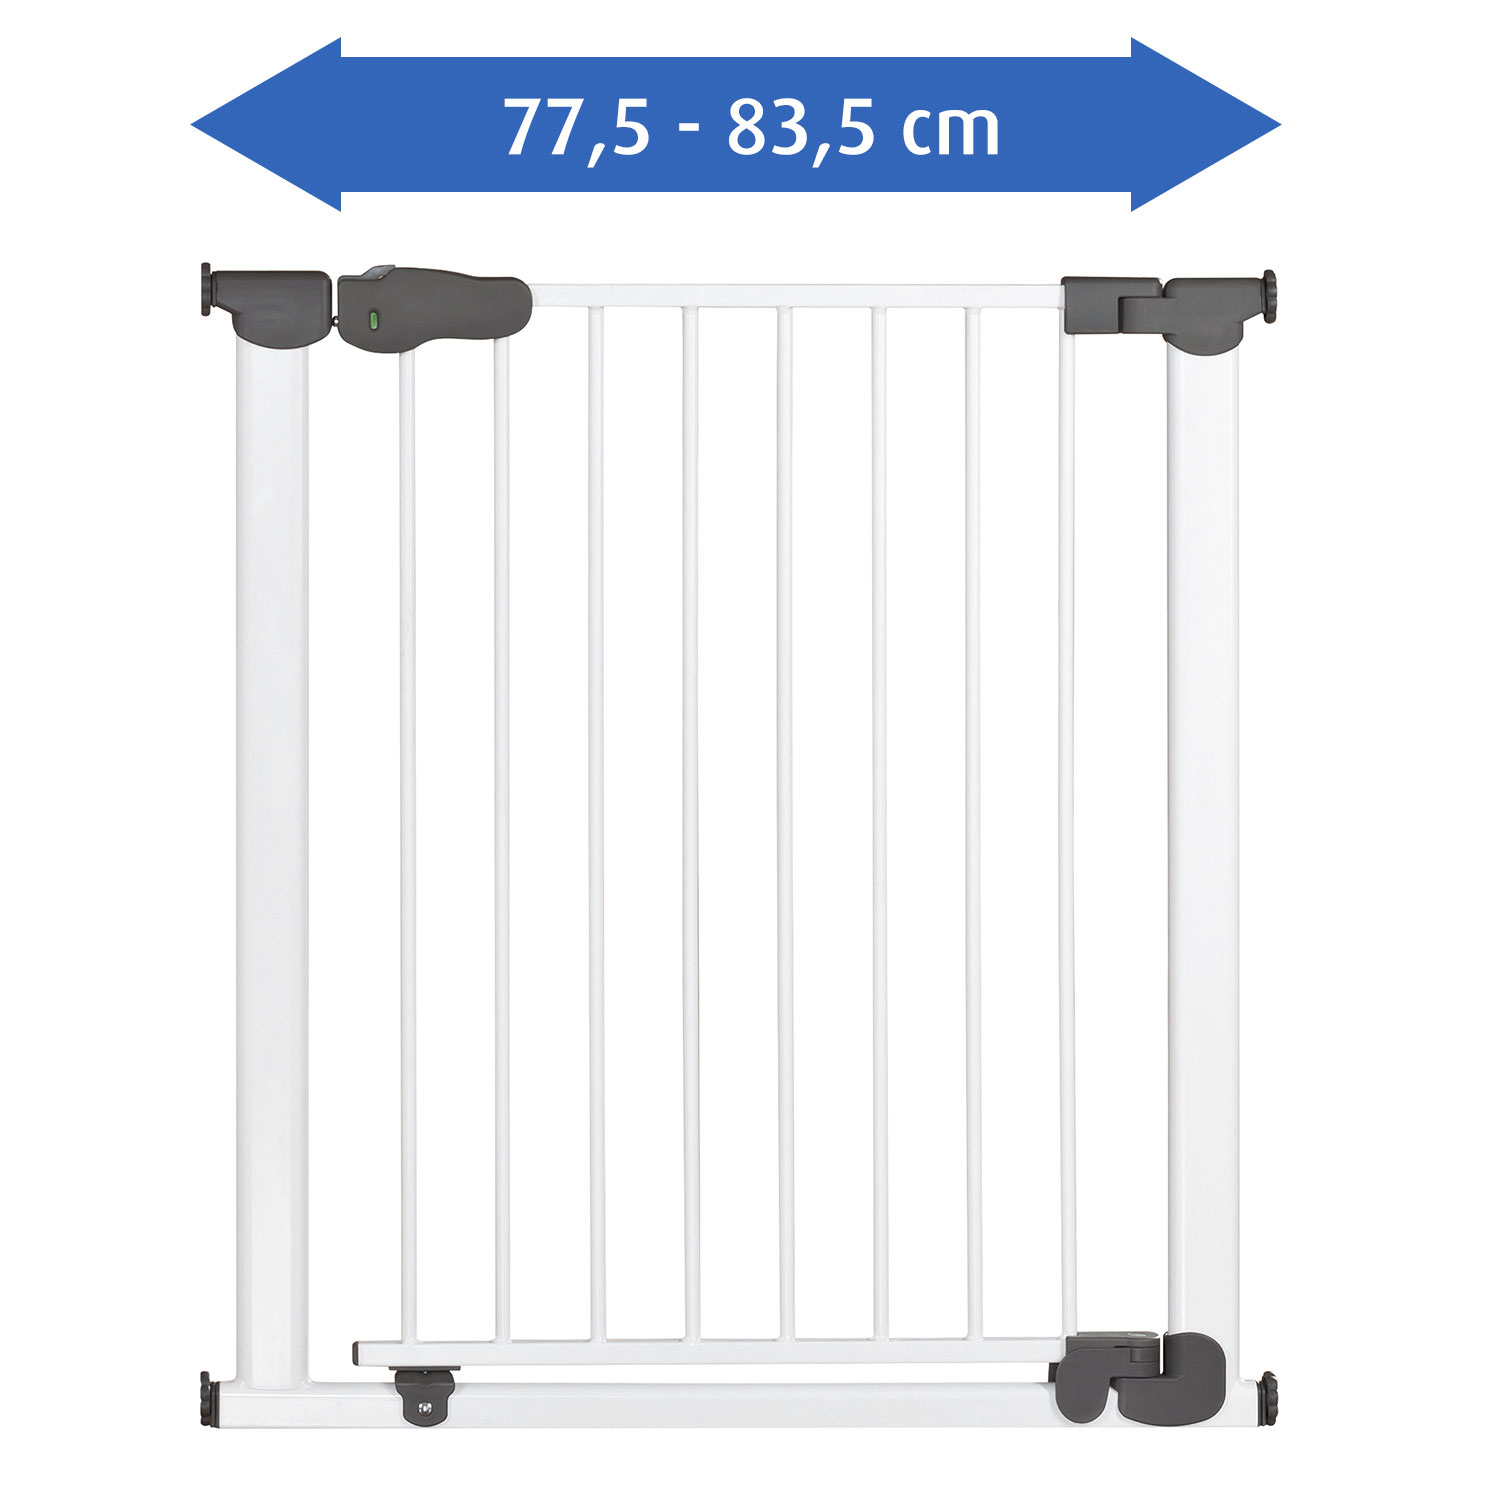 Advanced Pressure-mounted gate for gateway widths from 77.5 - 83.5 cm